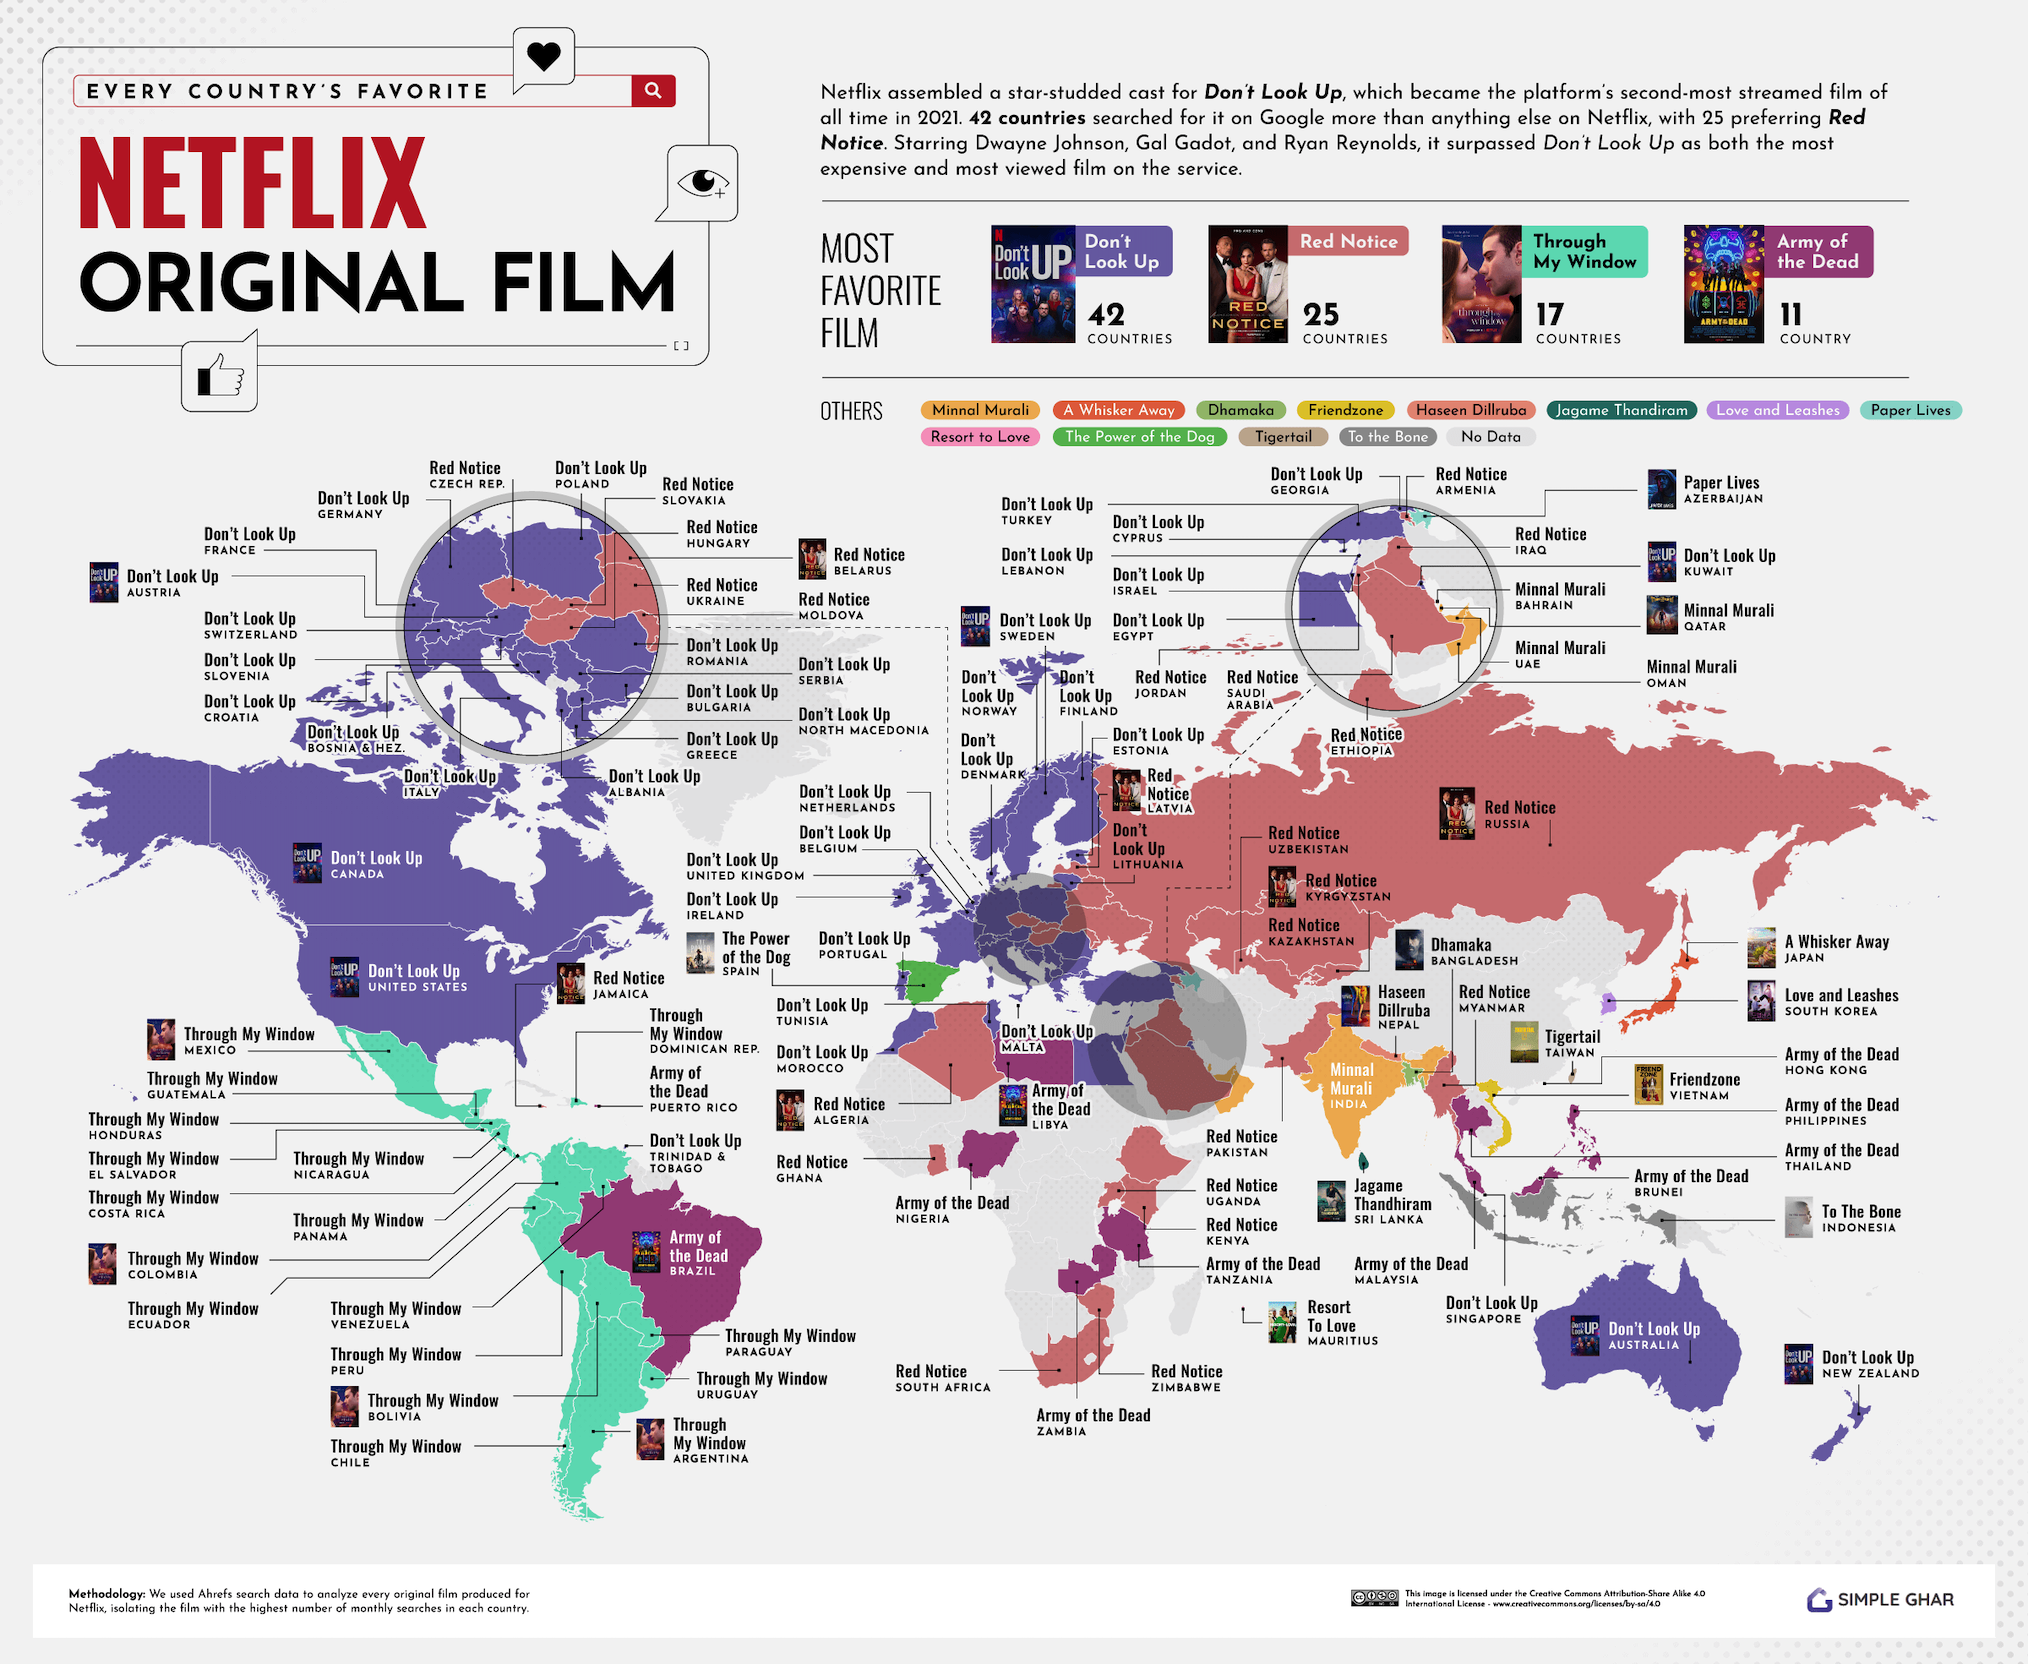 Every country's favorite Netflix film